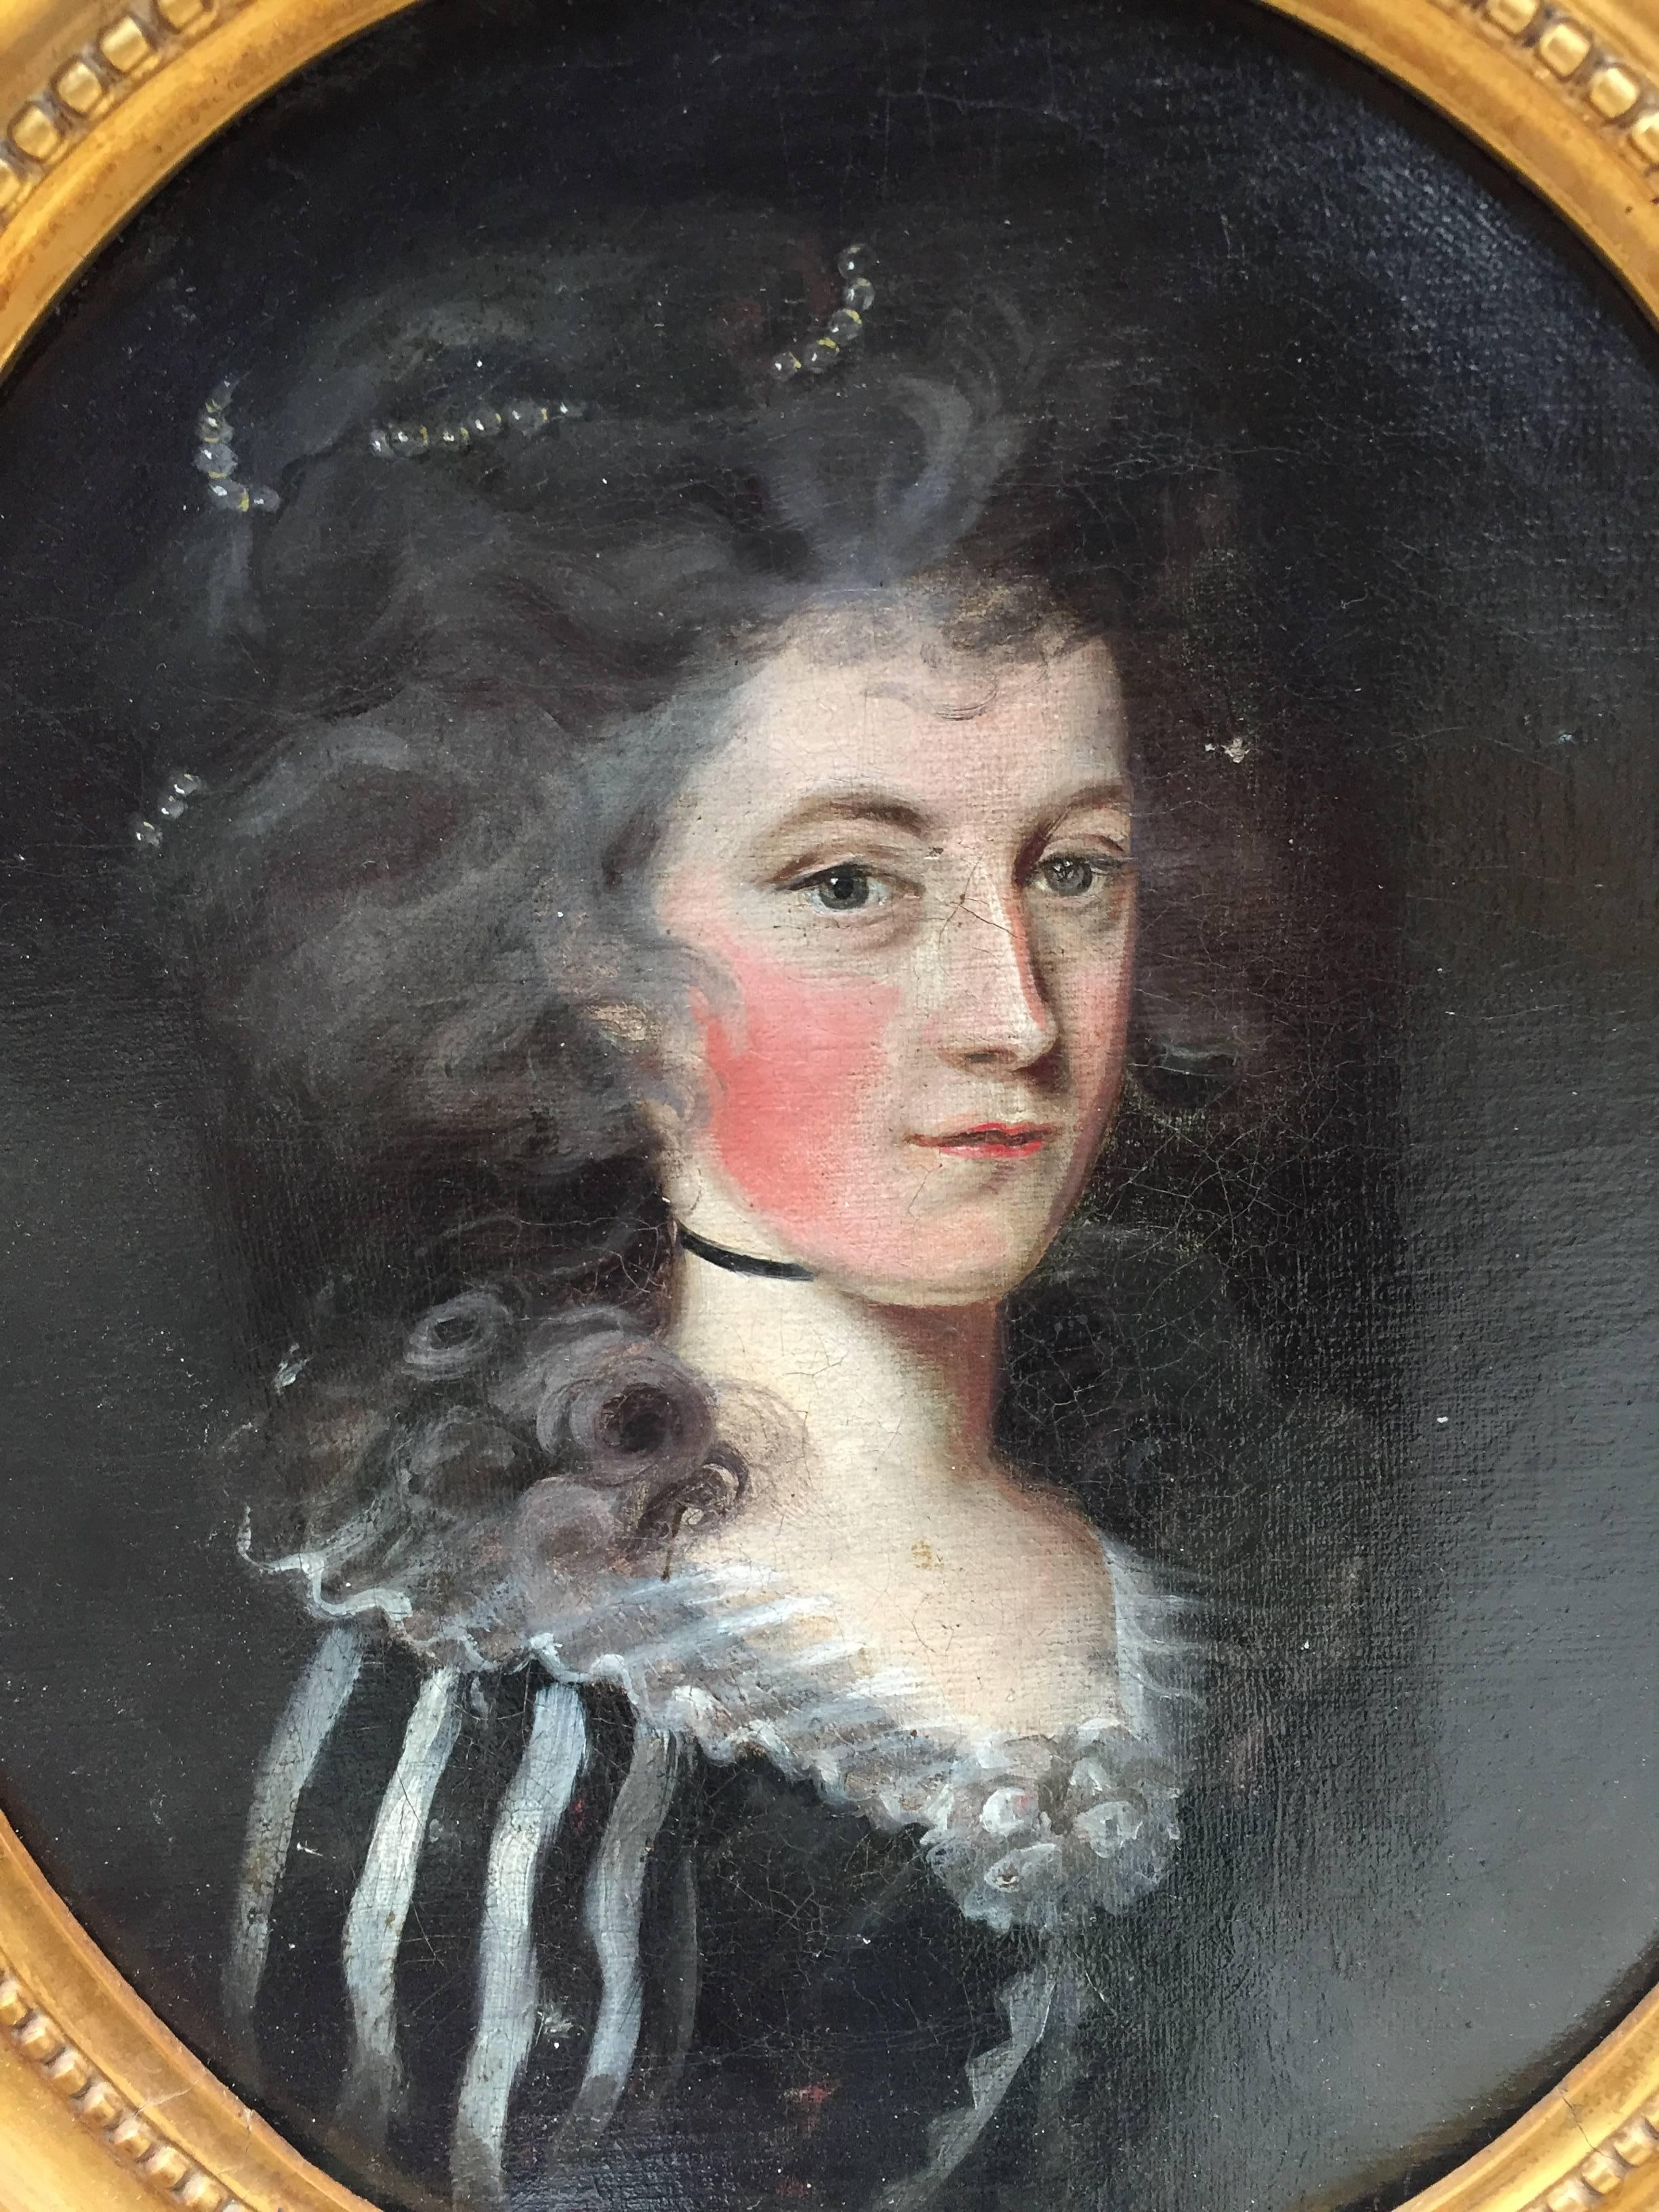 English 18th century Portrait of a lady with Pearls in her hair - Painting by Unknown